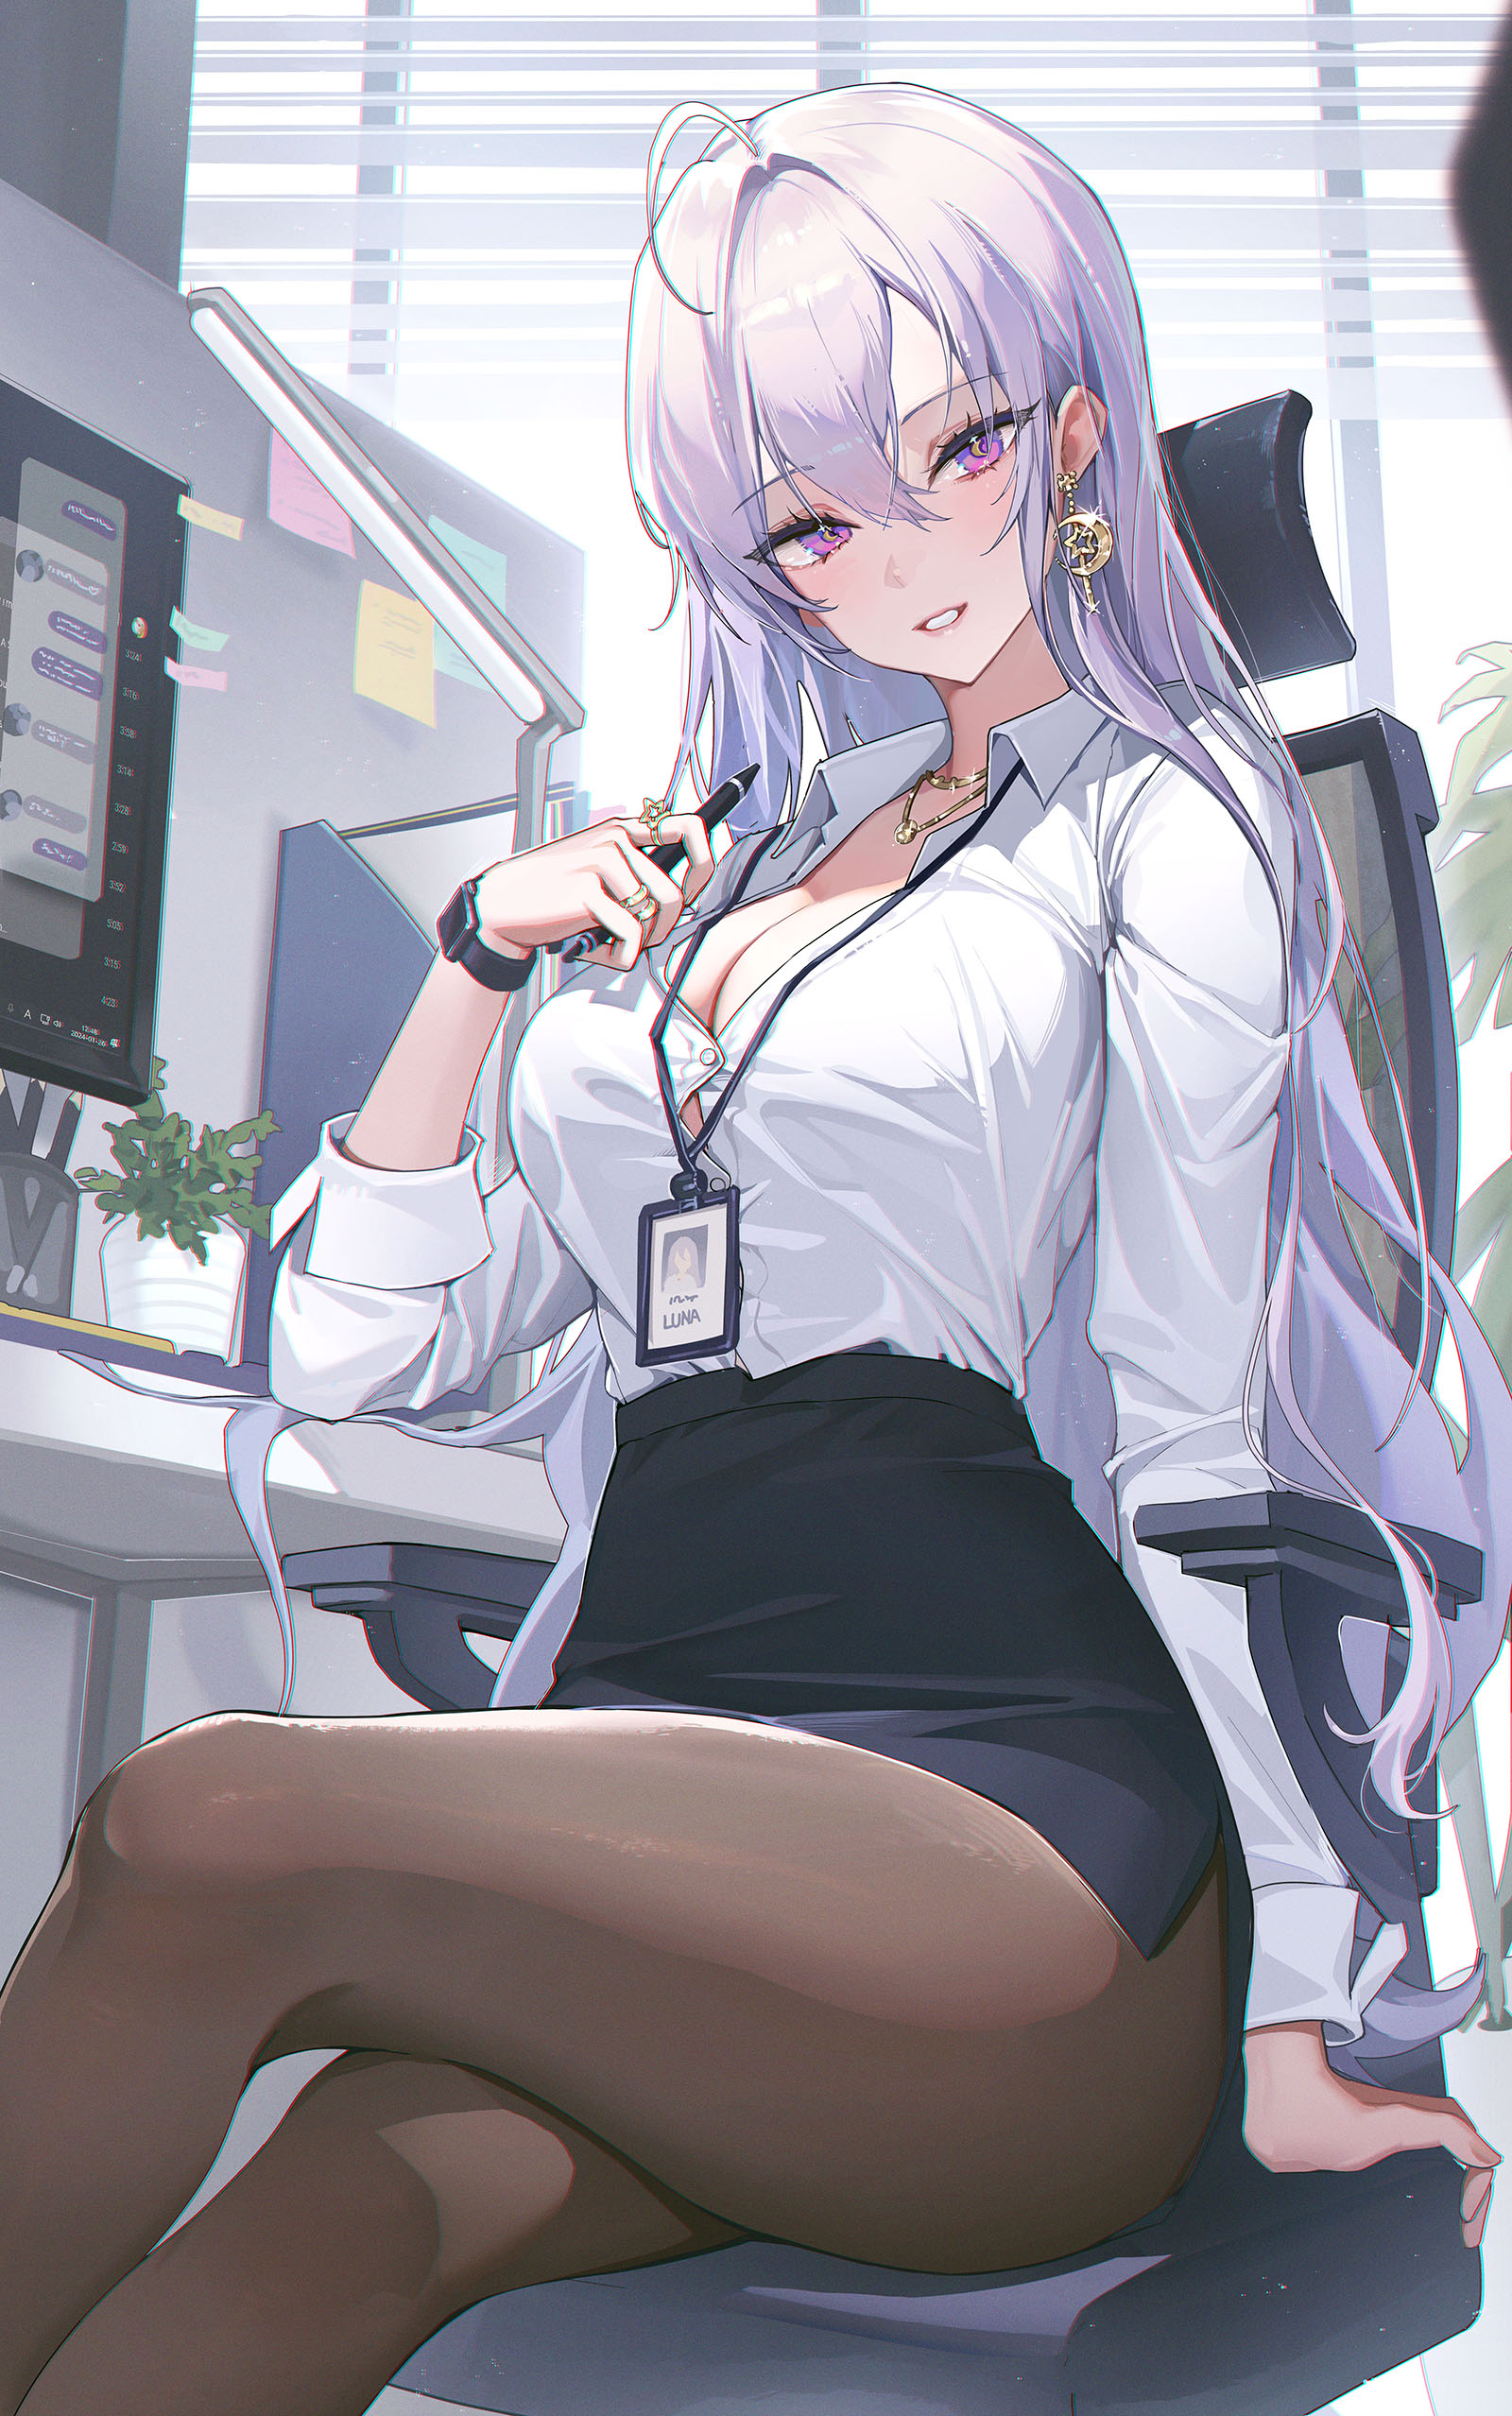 Anime 1600x2556 anime anime girls white hair long hair cleavage cutout hand in cleavage looking at viewer pink eyes office office chair blushing Fan Service big boobs erotic art 